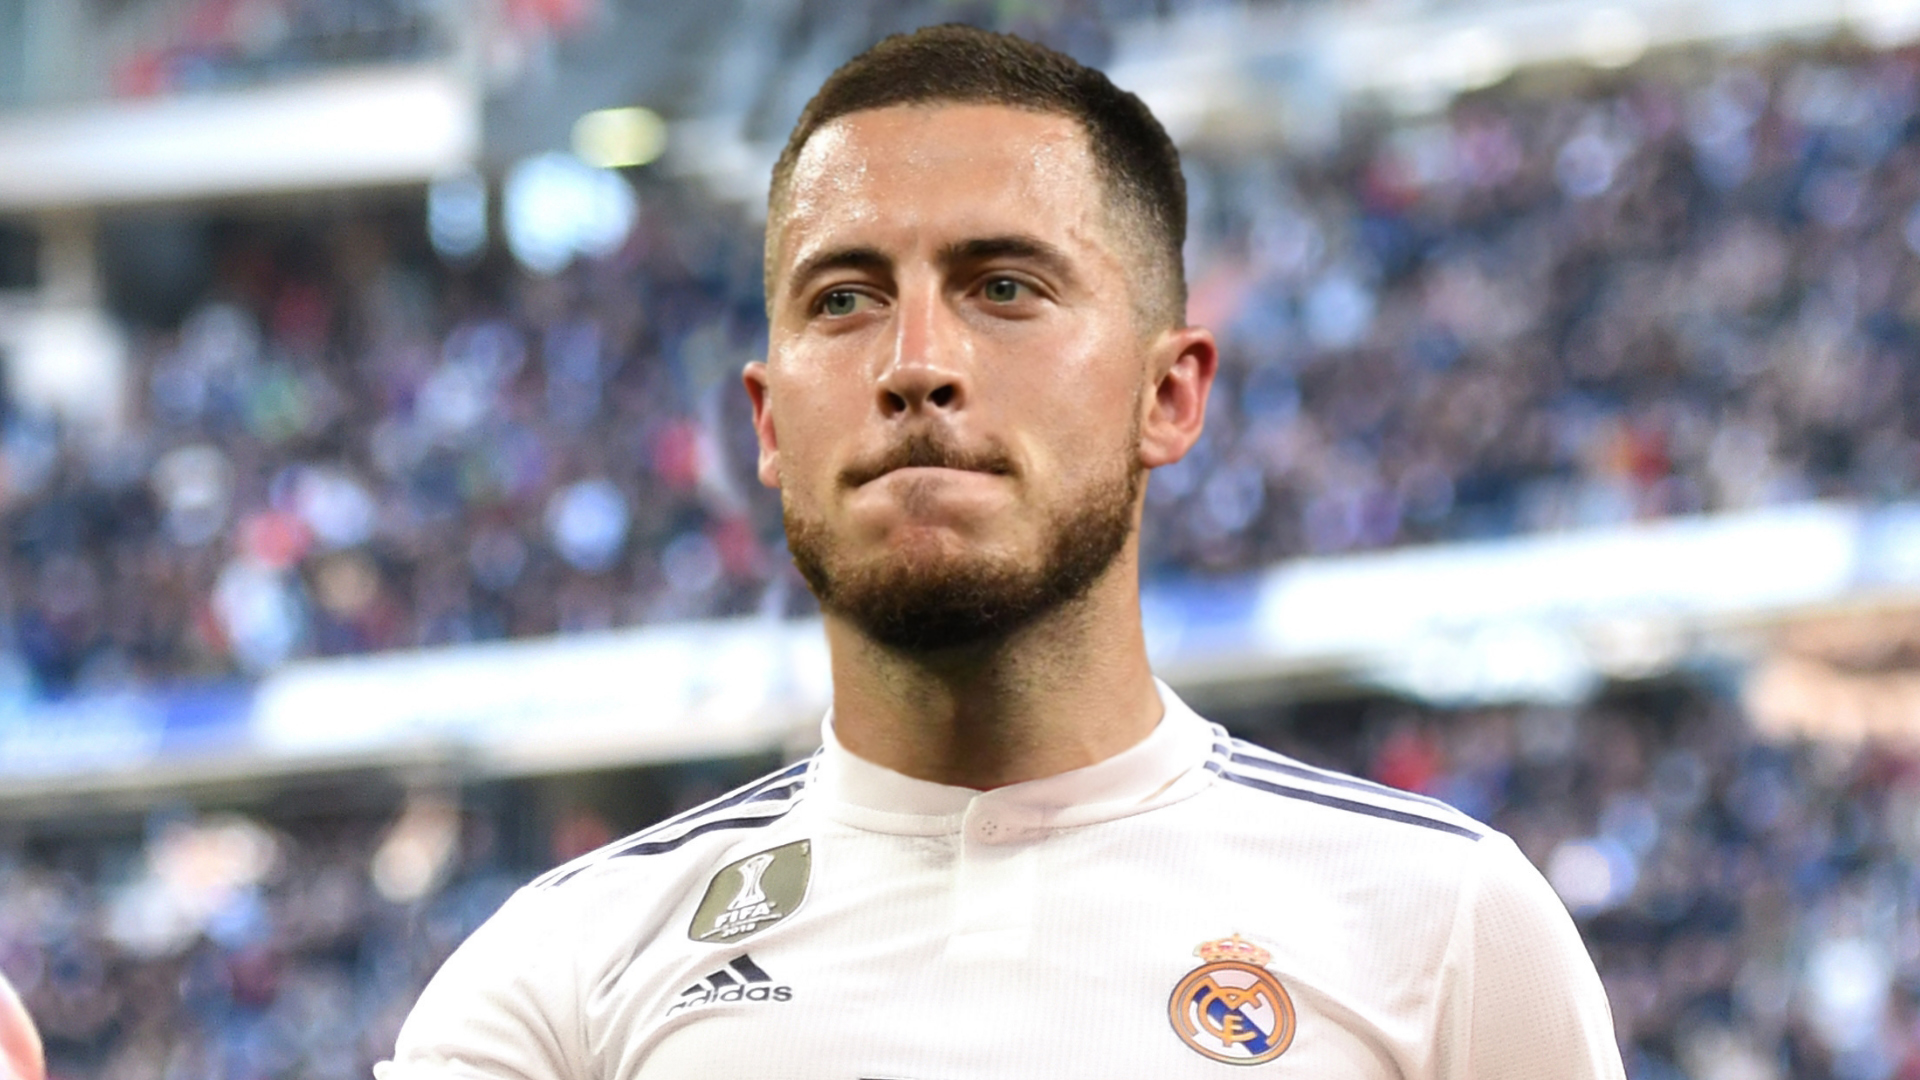 Eden Hazard transfer news: Real Madrid confirms signing Chelsea player